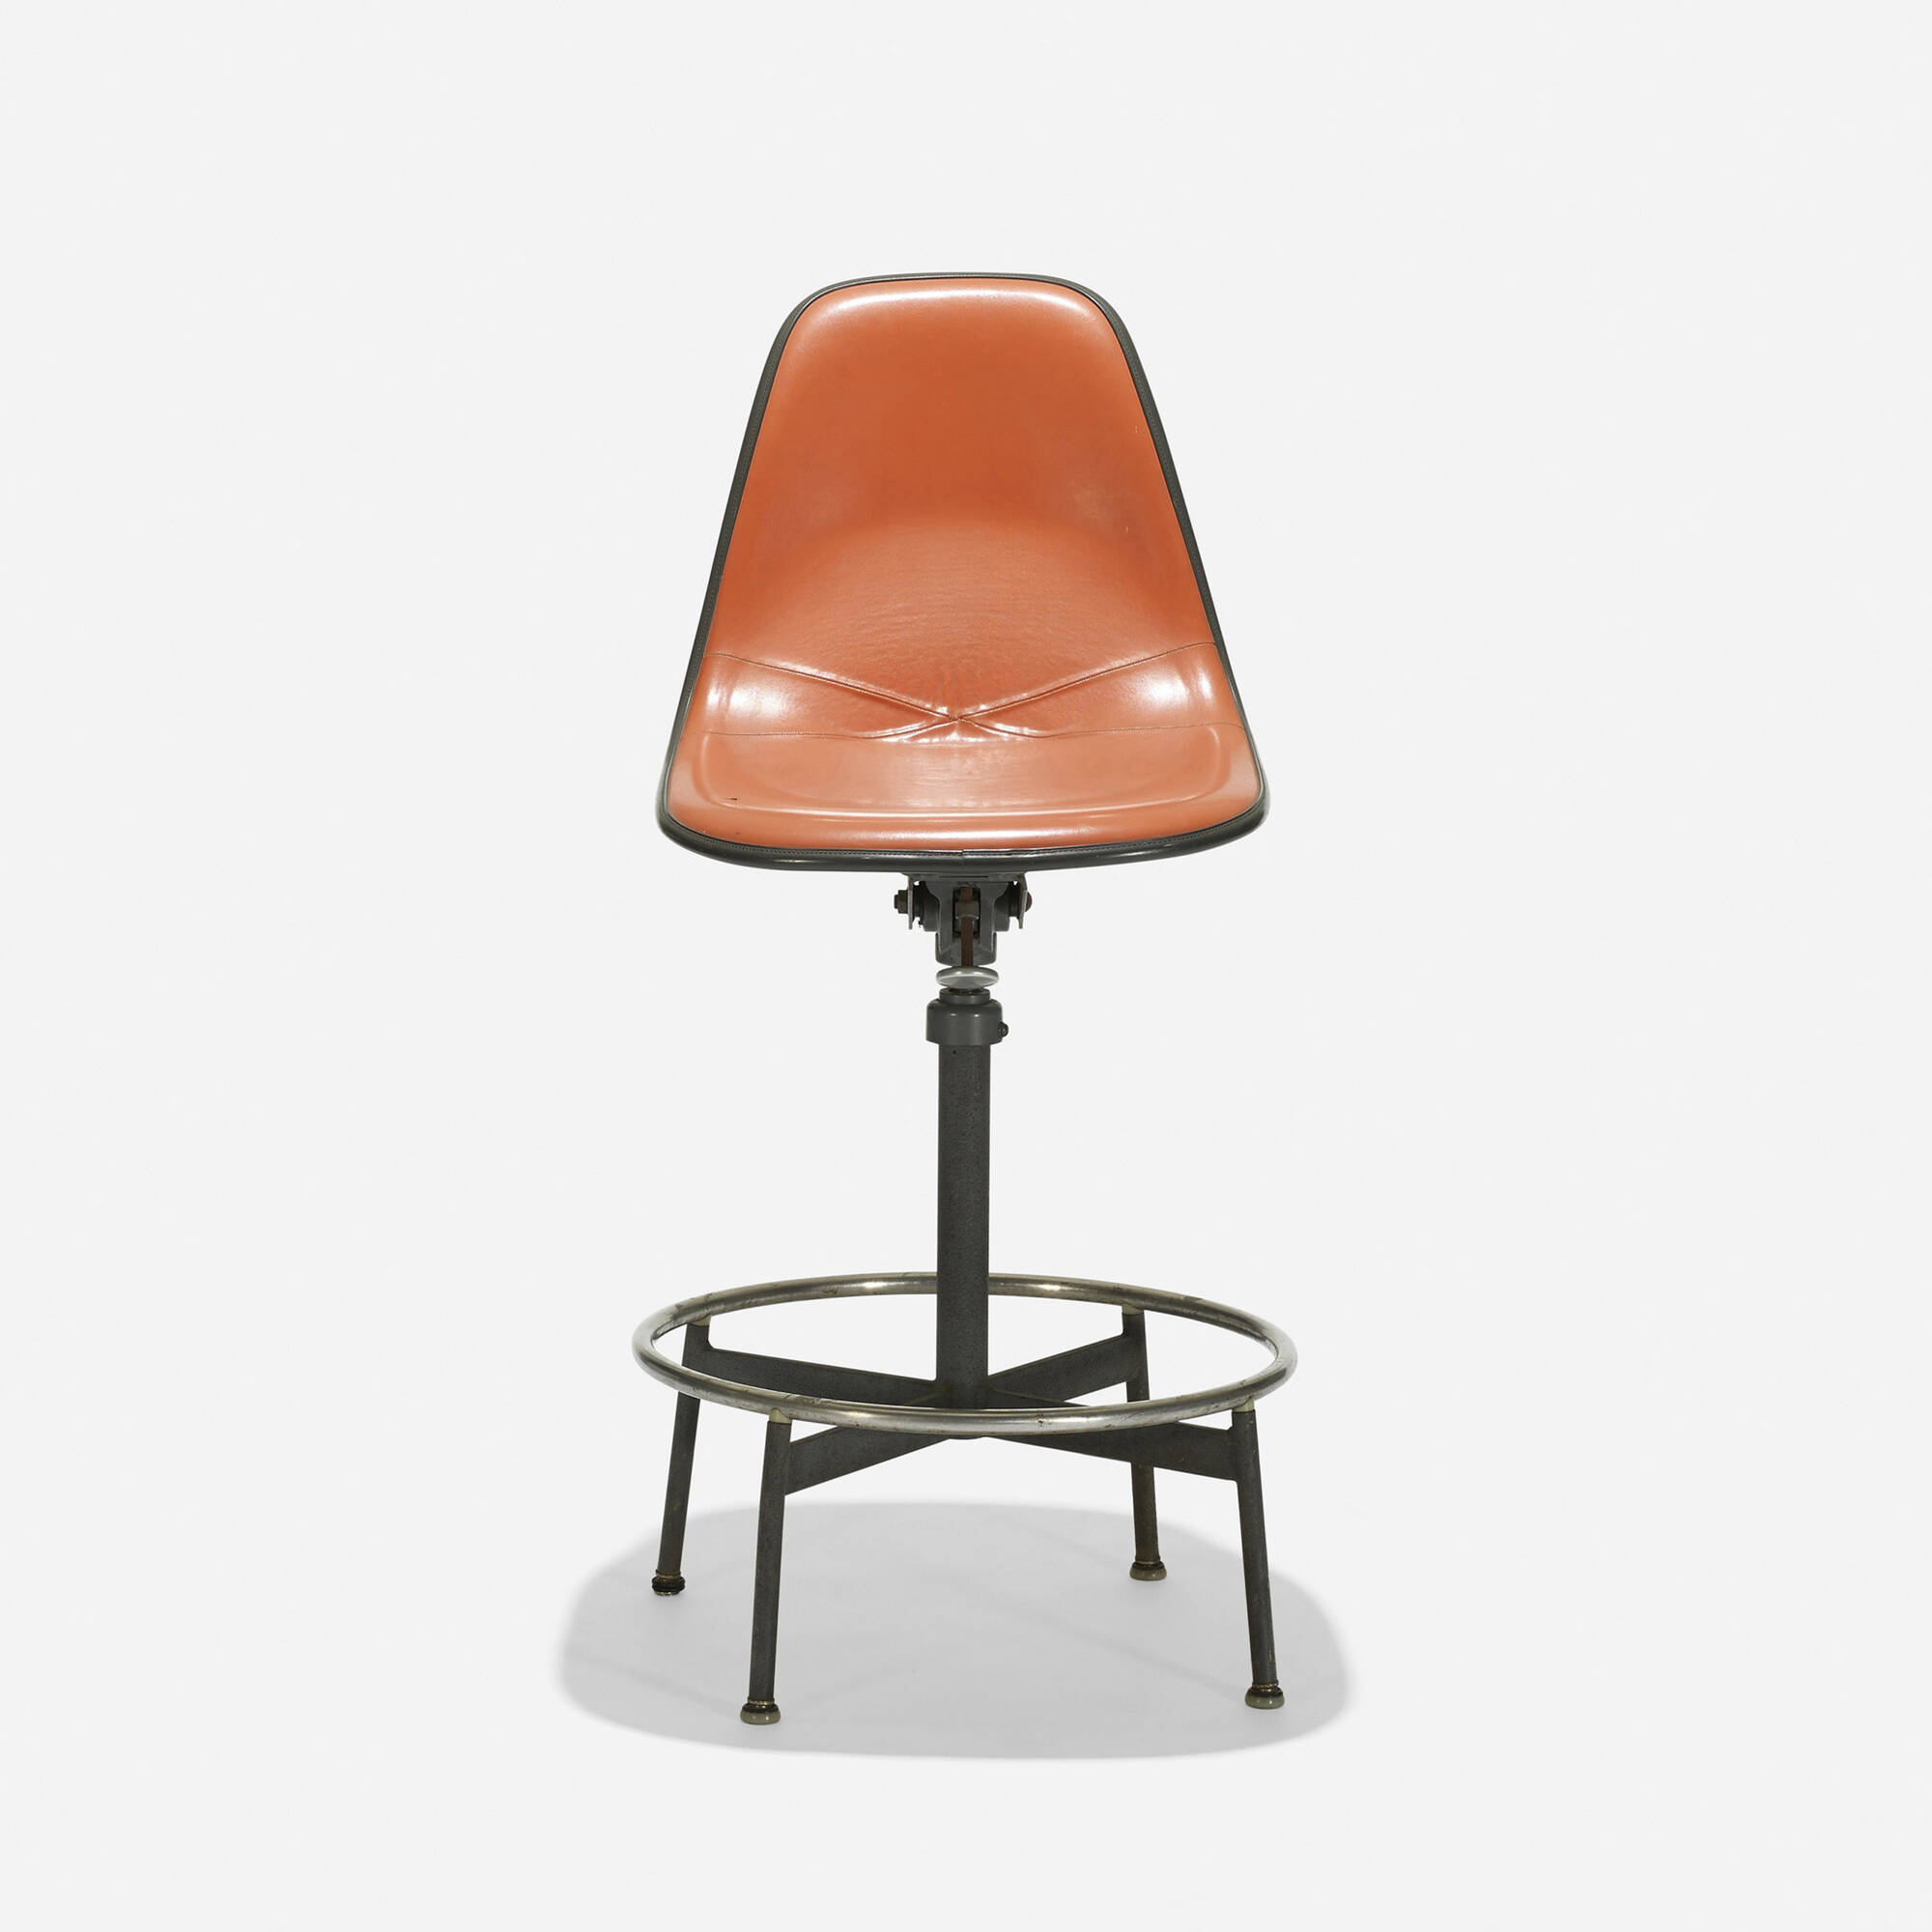 203: CHARLES AND RAY EAMES, Drafting chair, model 622TS-1 < Eames